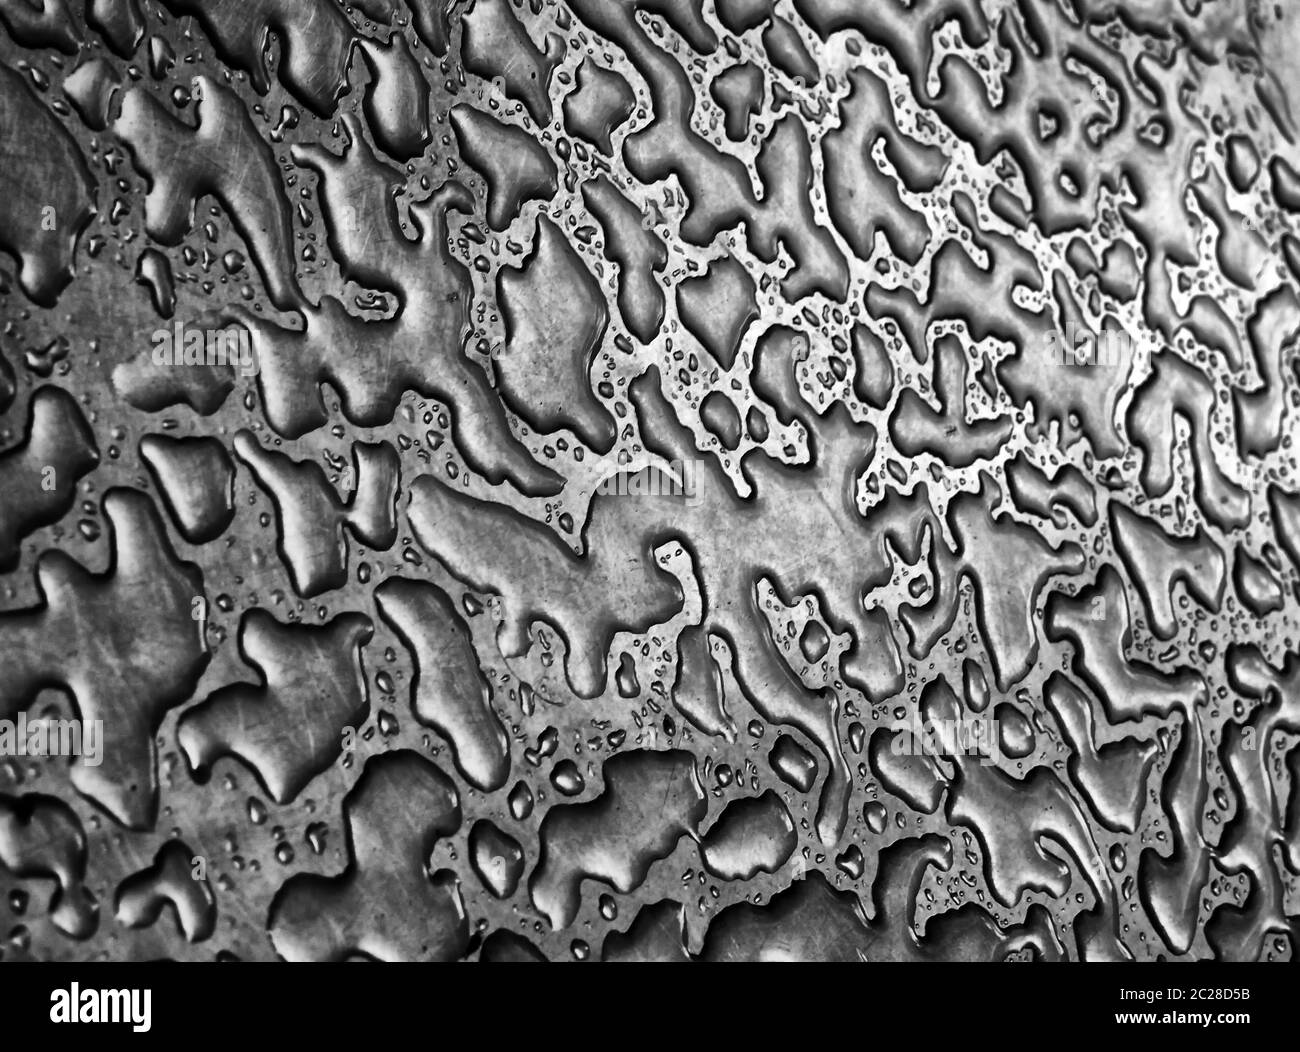 water from rain on a steel surface making an abstract background pattern Stock Photo